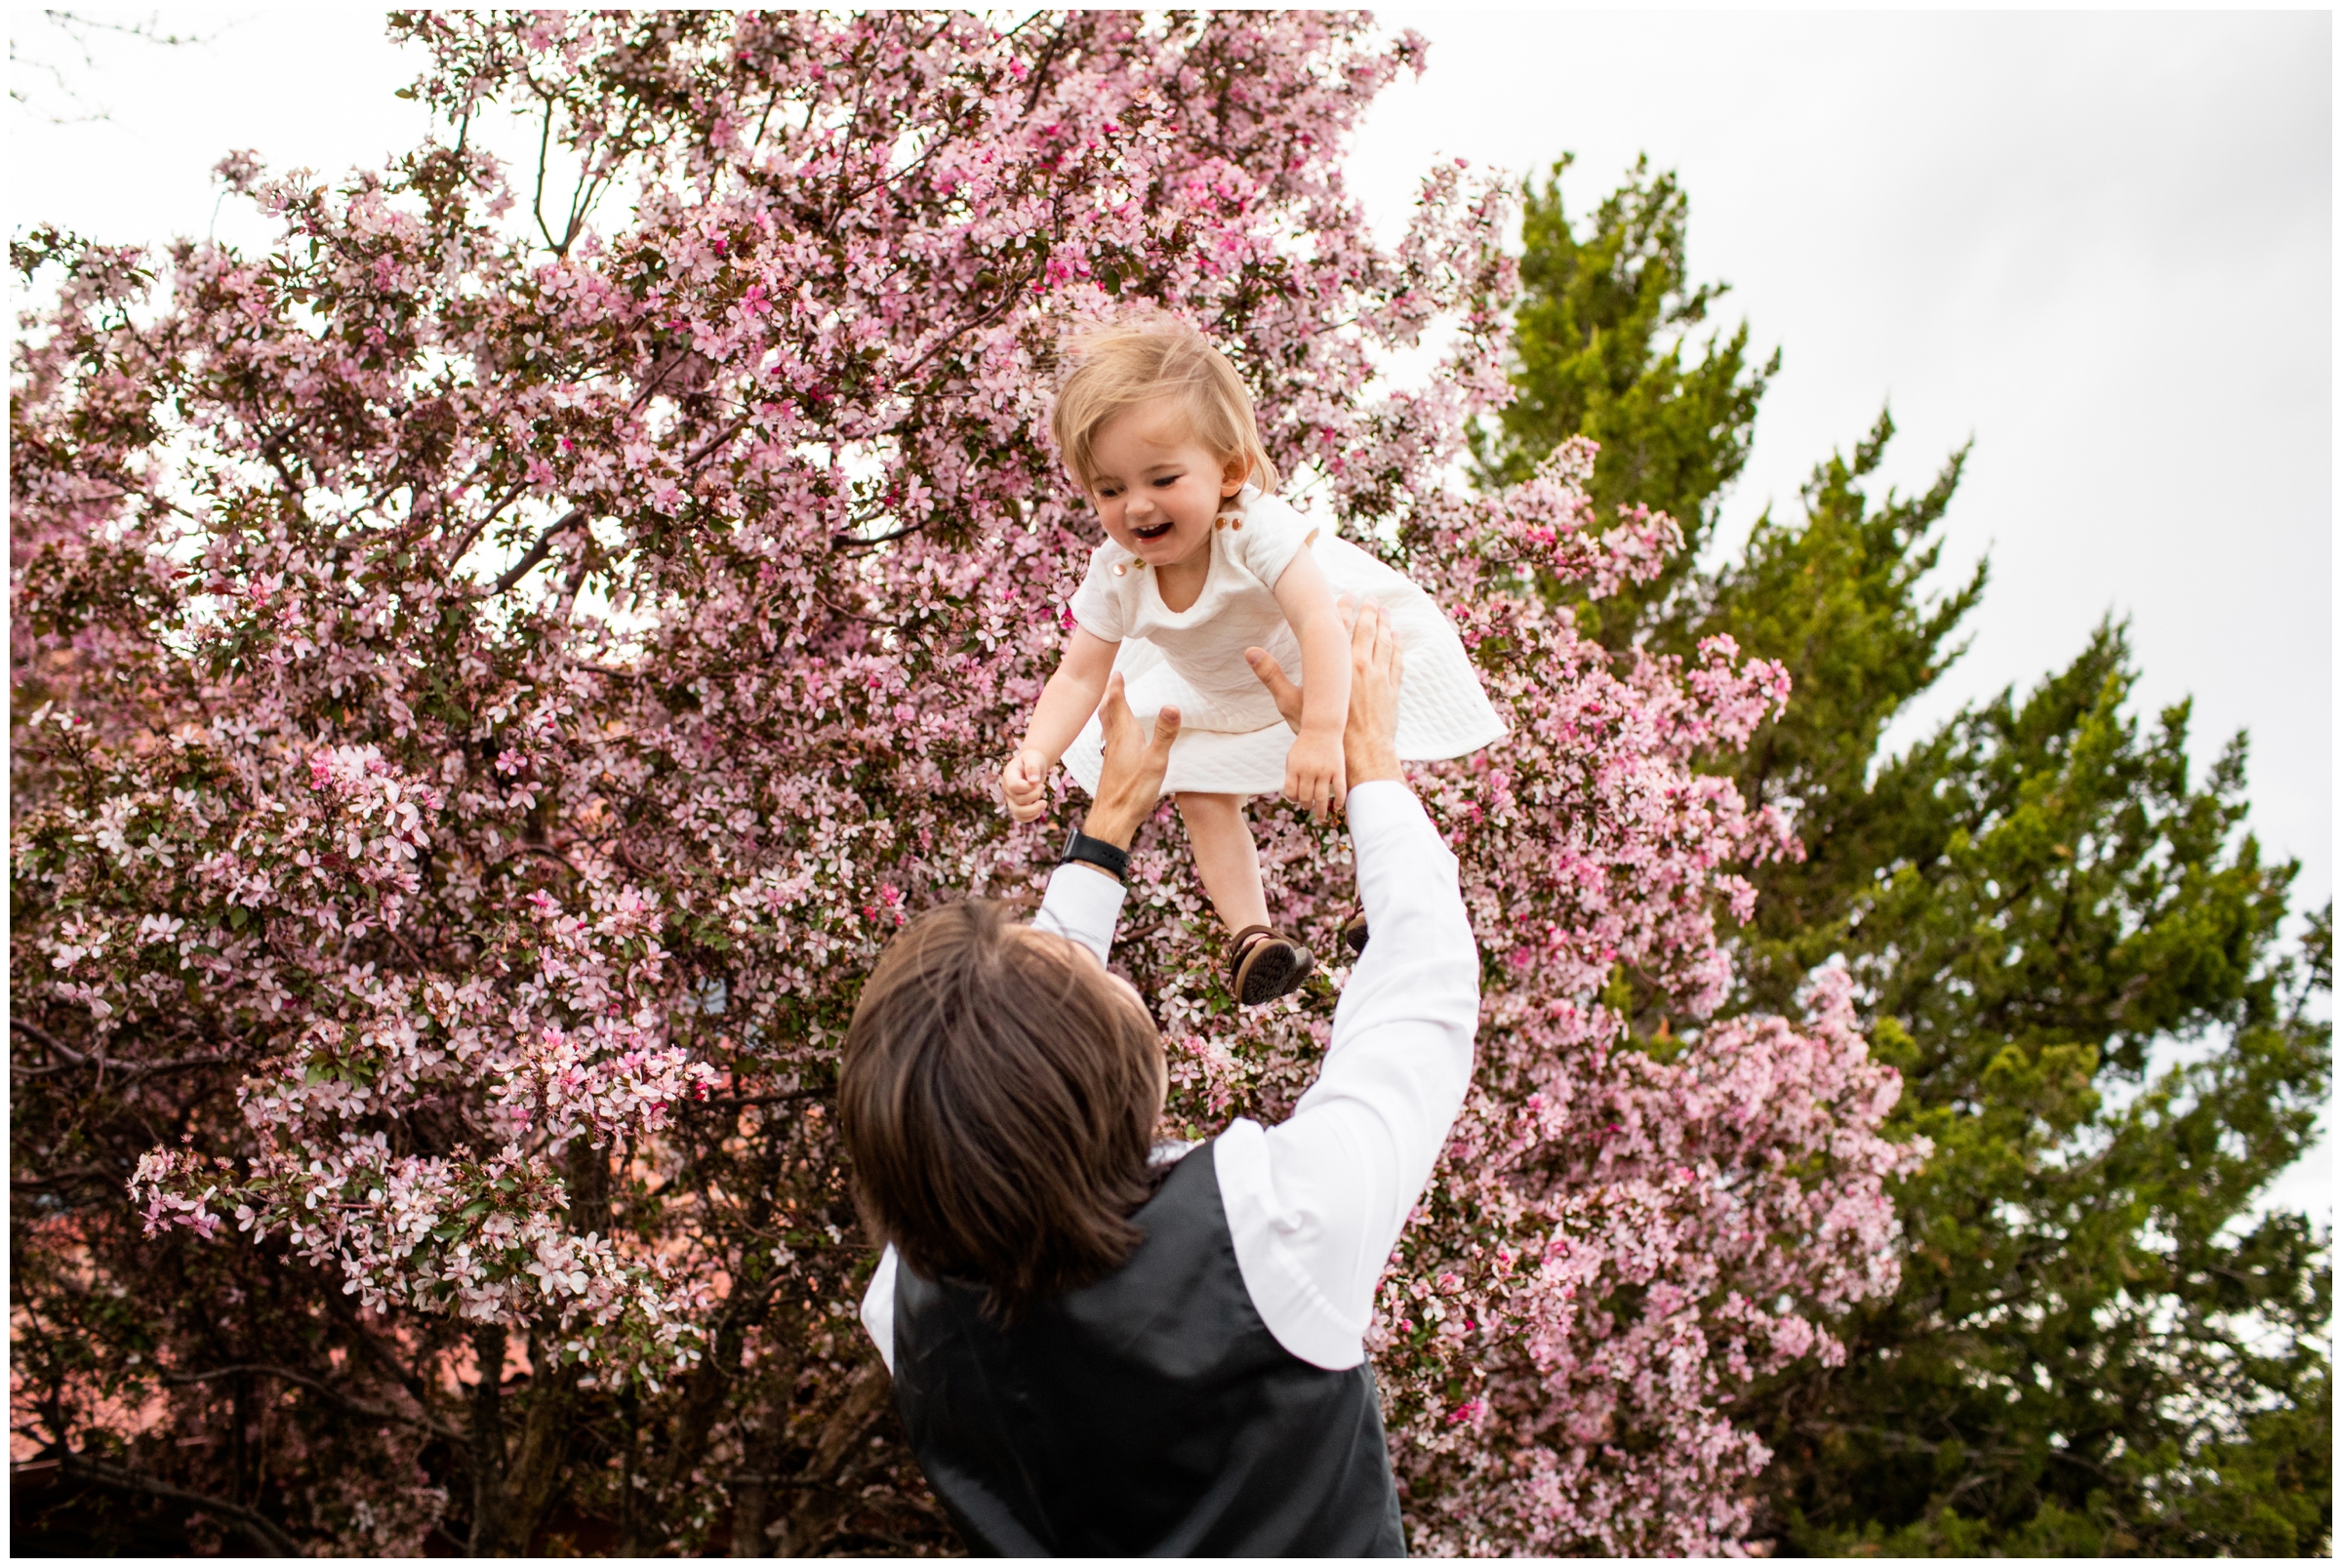 dad lifting daughter into the air with spring flowering trees in background during candid Longmont Colorado family photos 